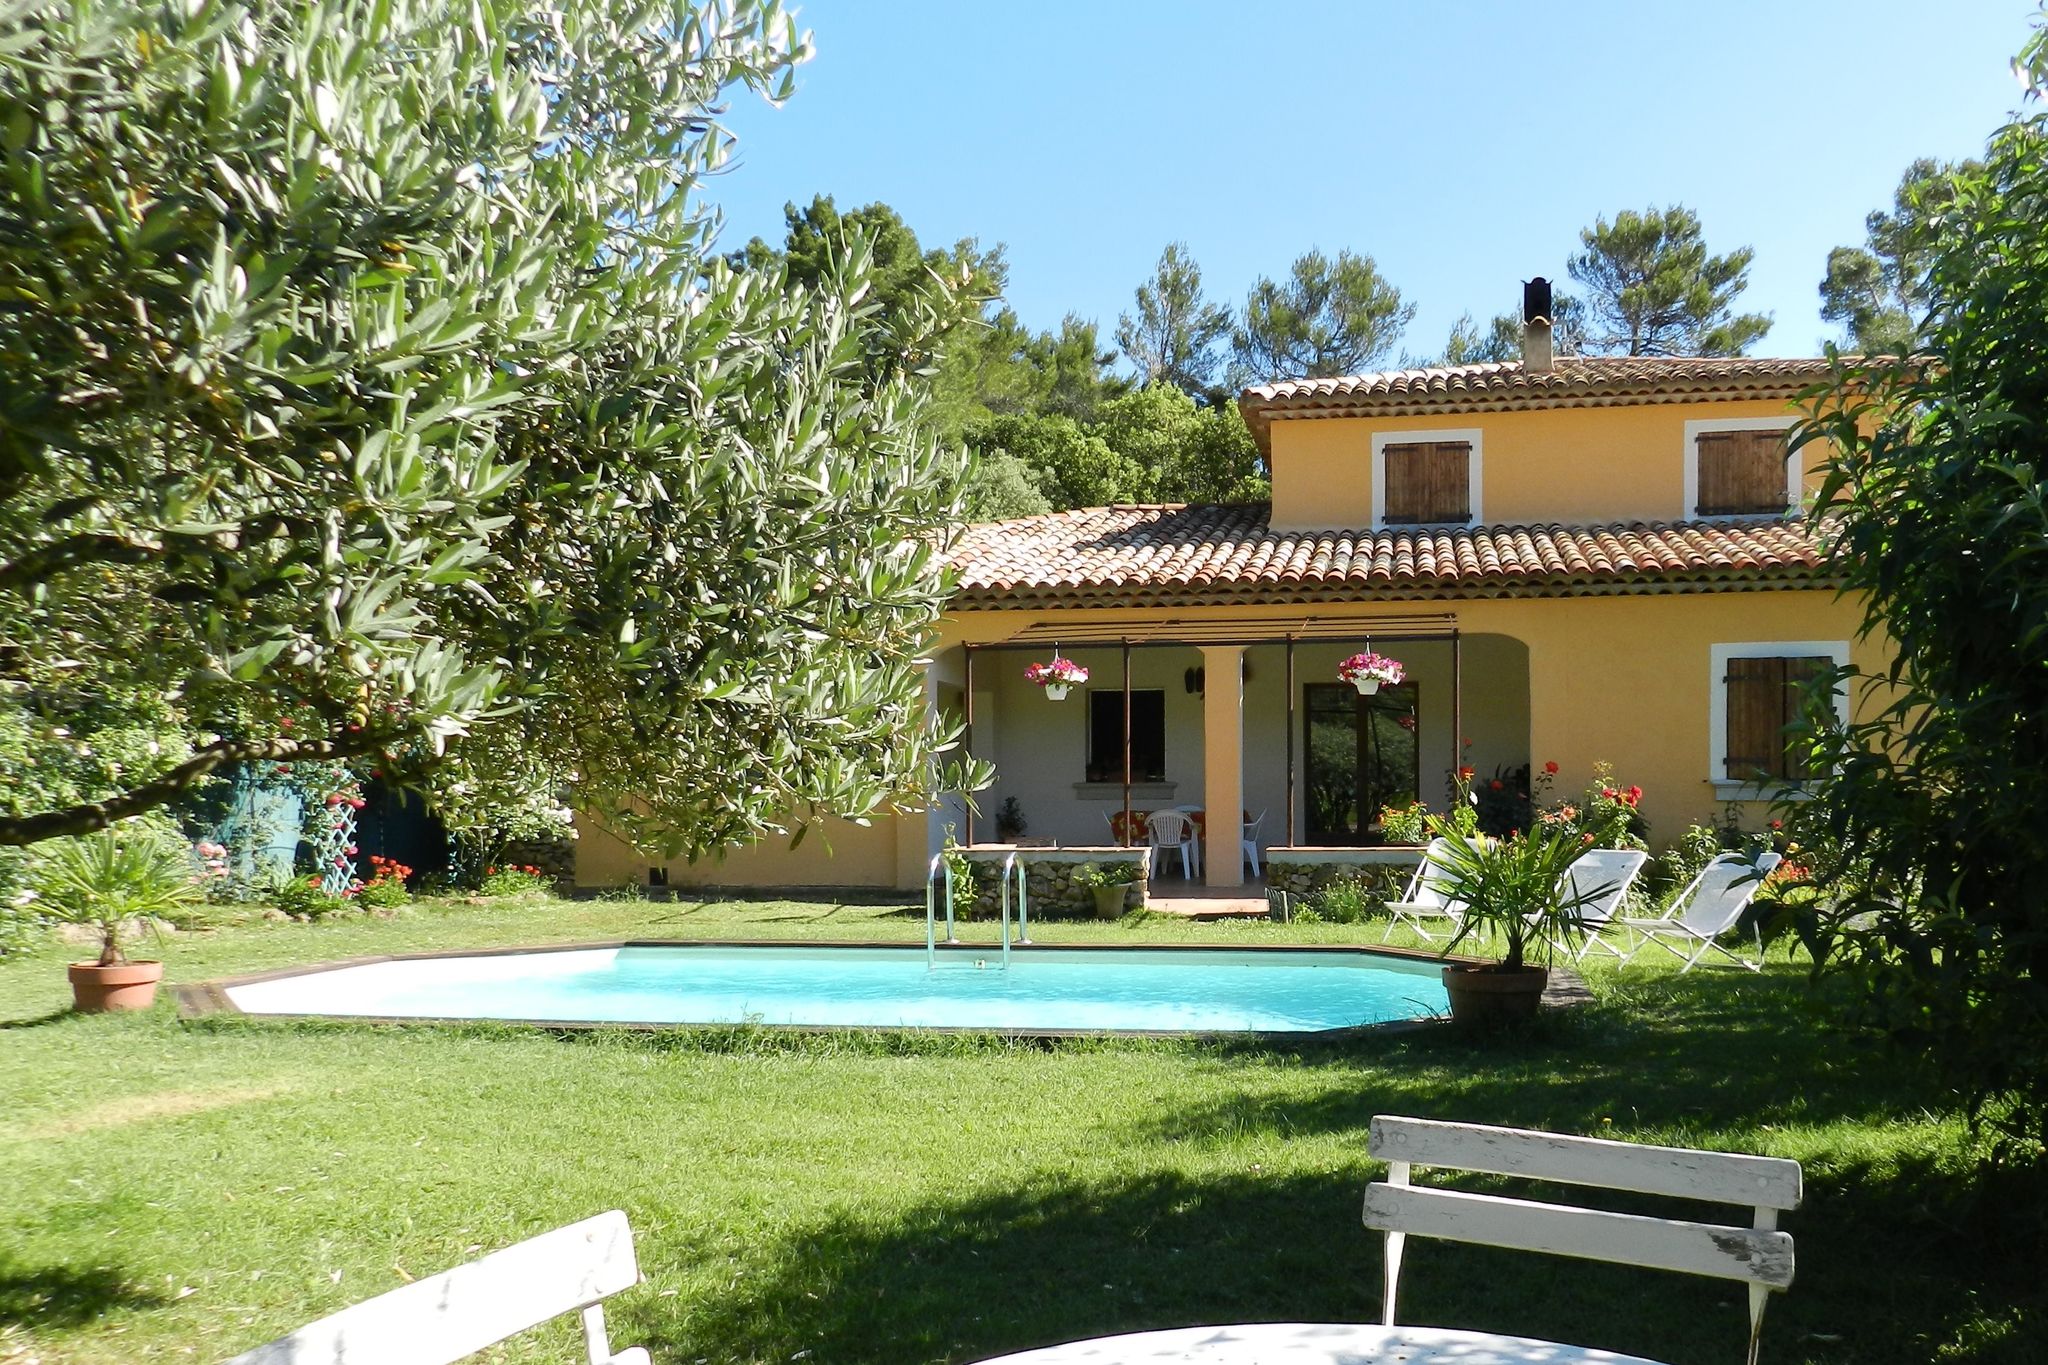 Sweet holiday home with a large lawn, swimming pool, privacy and close to cute villages